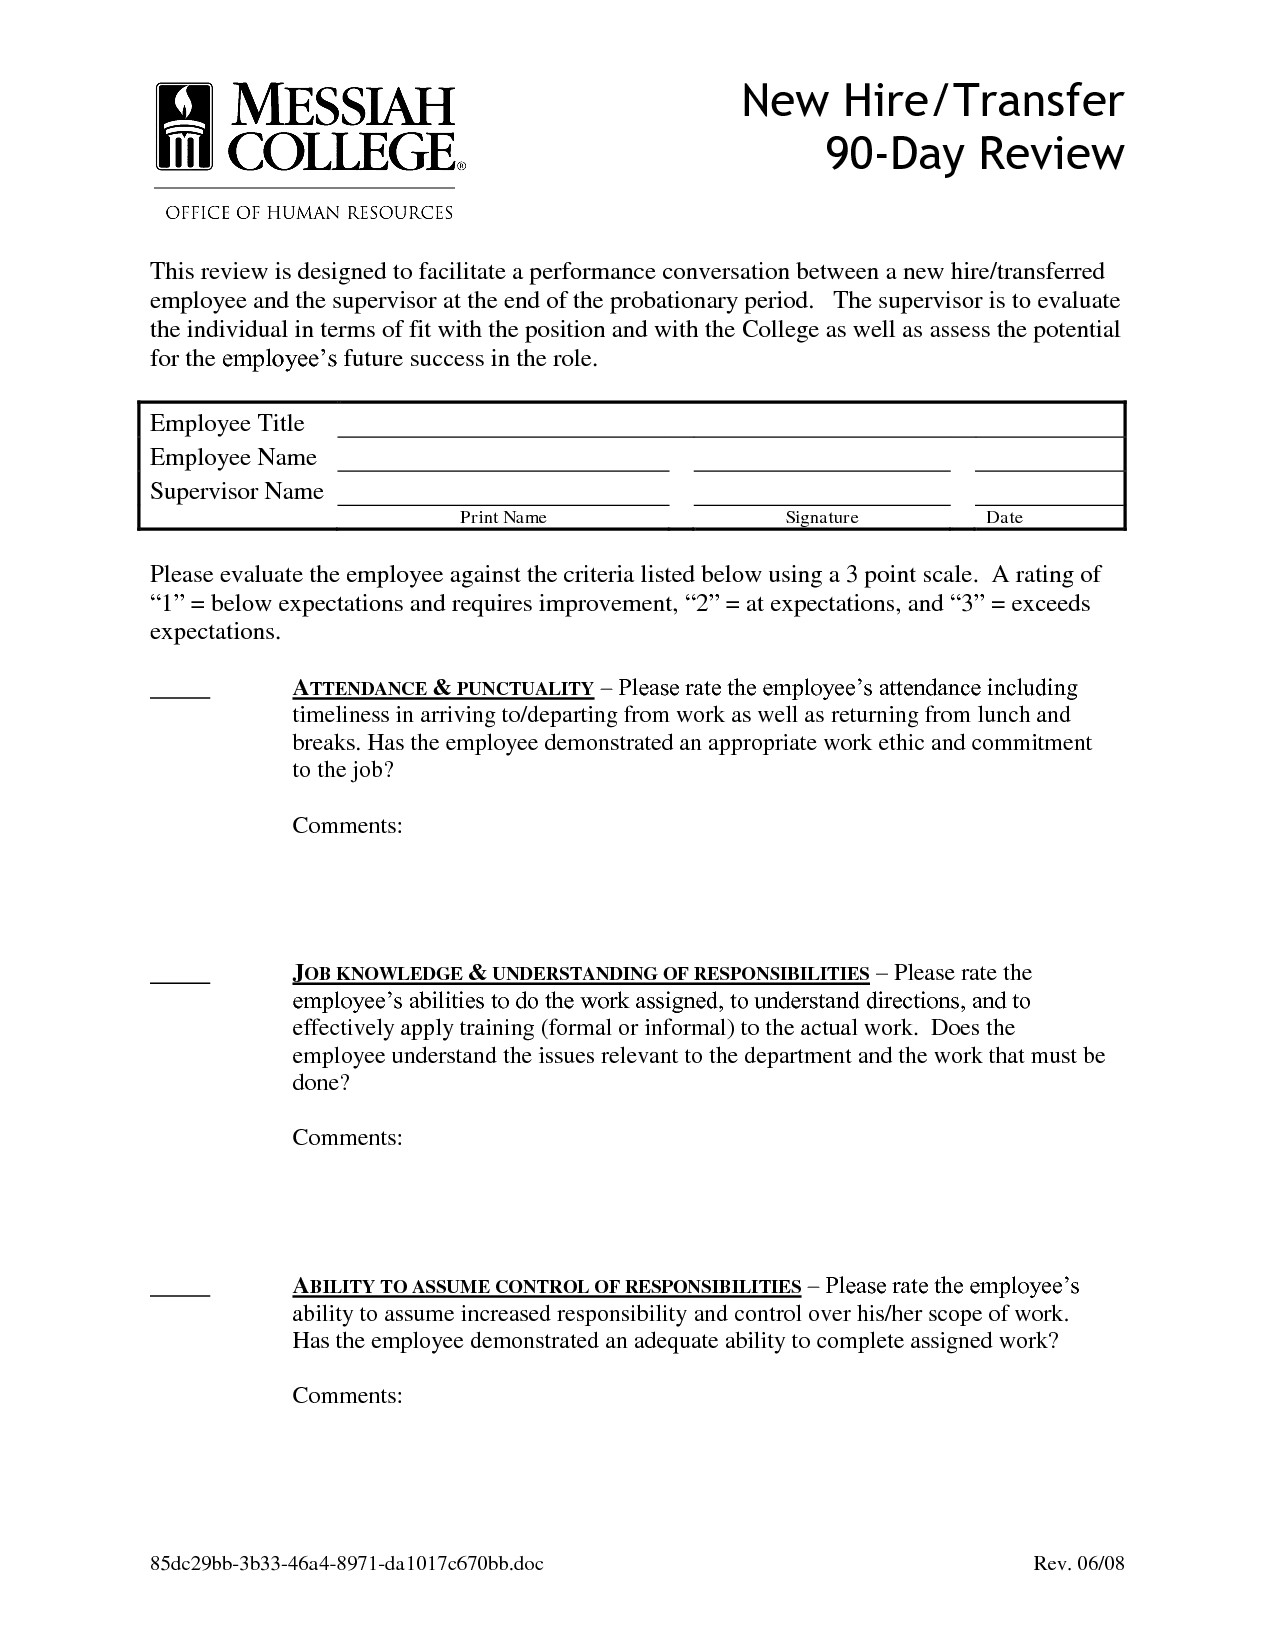 Best s of 90 Day Probationary Form 90 Day Employee